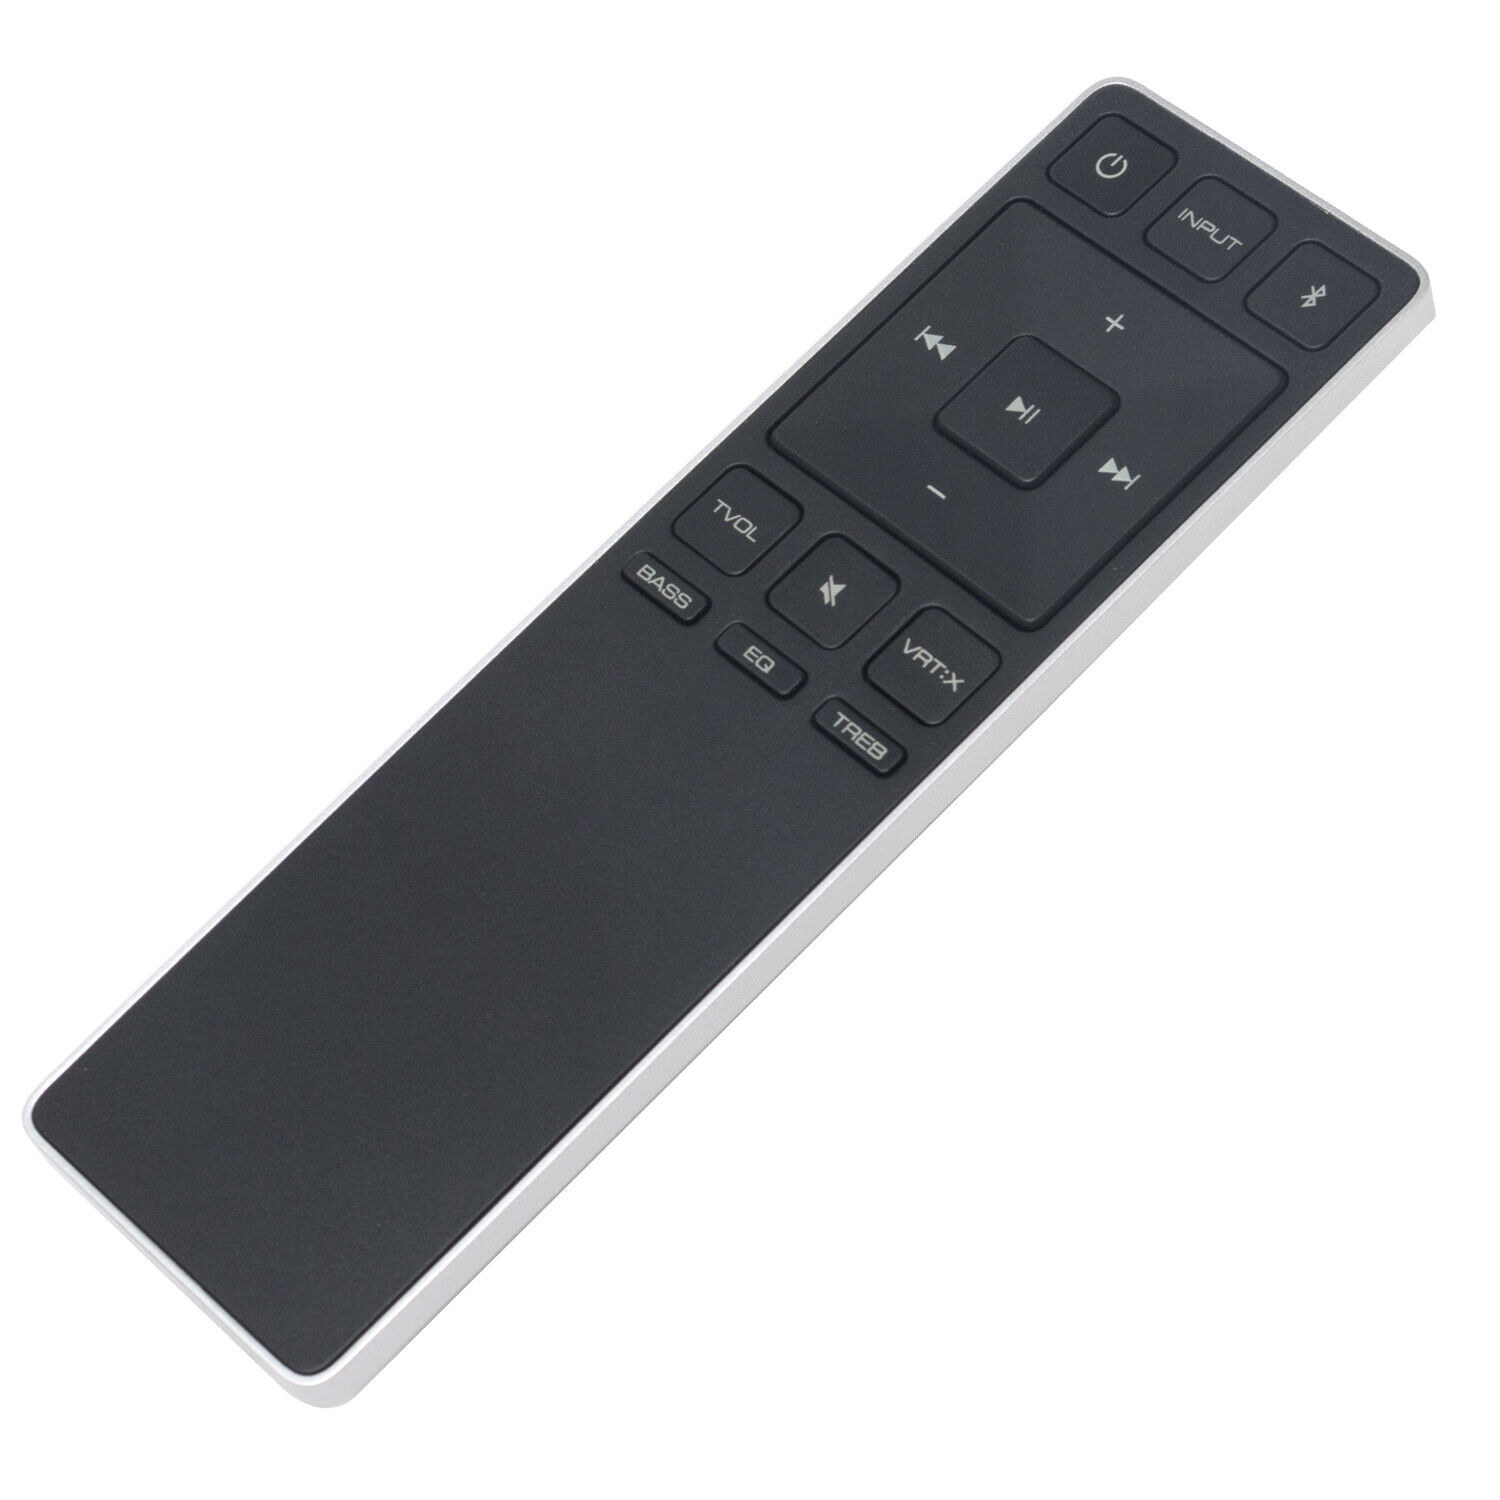 New XRS321N-F Replace Selling Remote for Soundbar SB362An-F6 Vizio SB362 Challenge the lowest price of Japan ☆